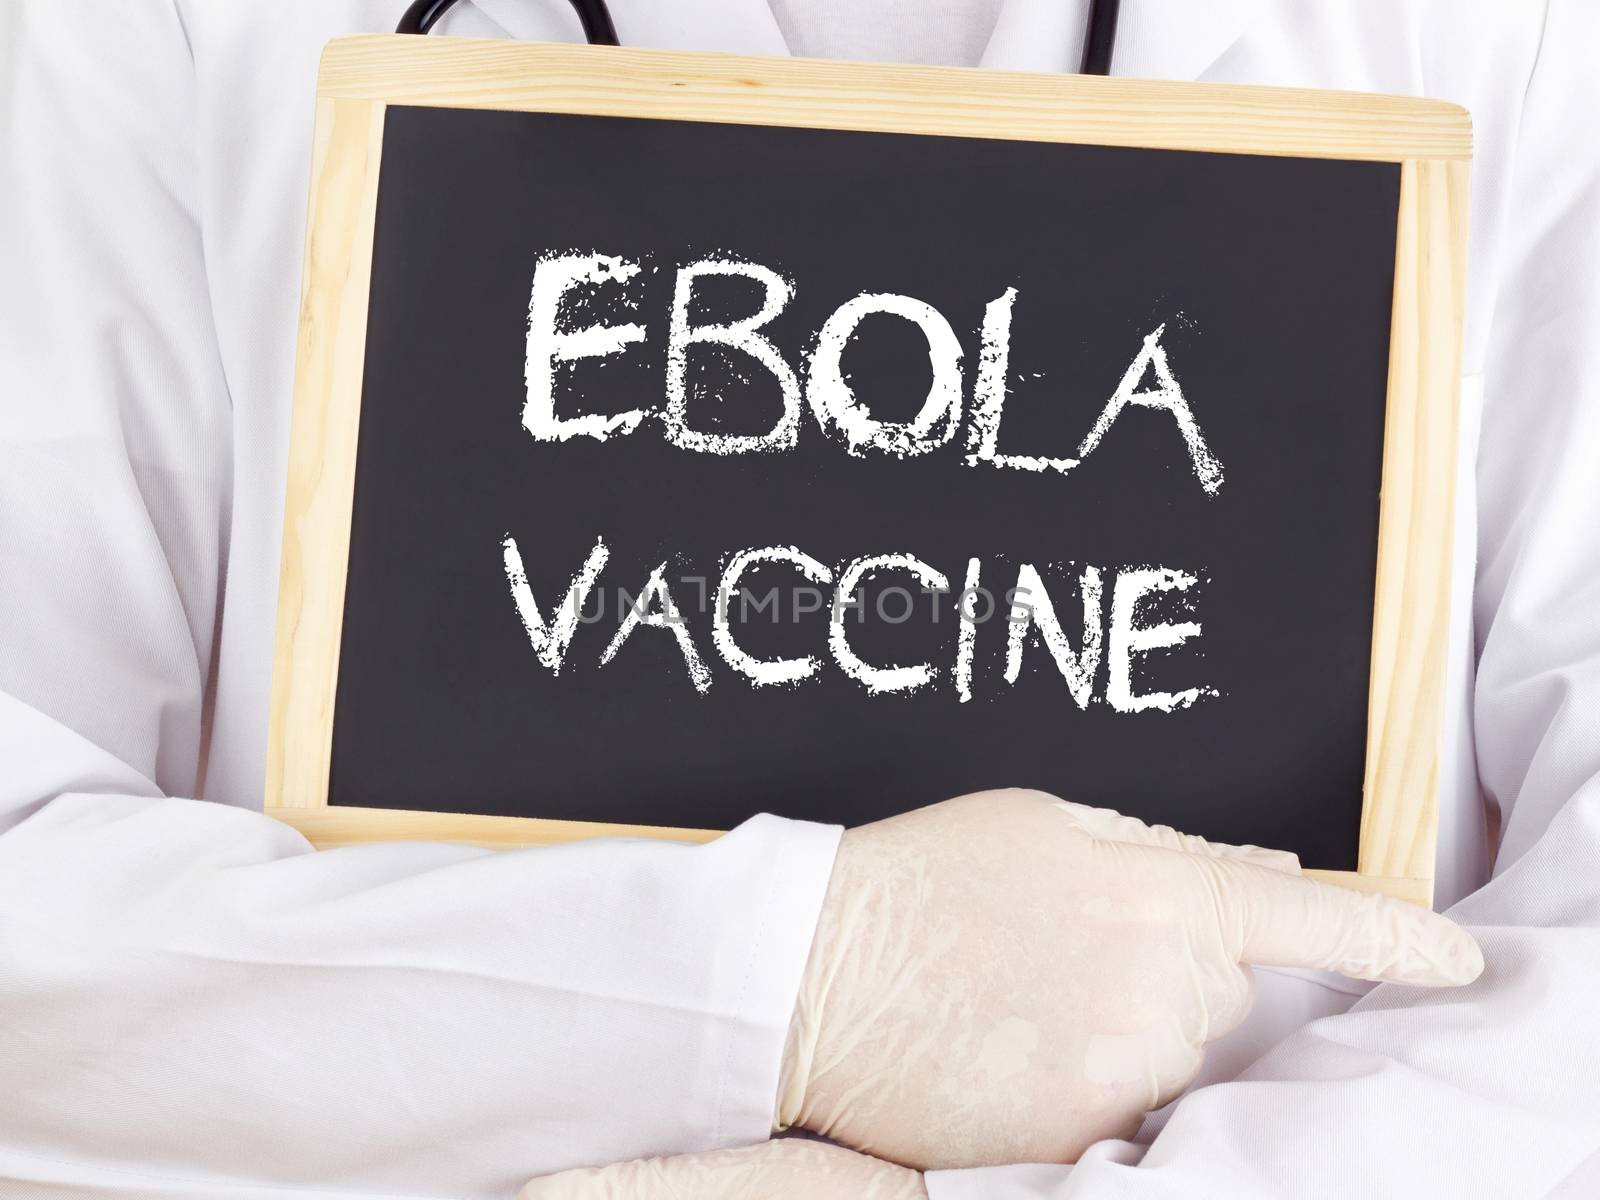 Doctor shows information: Ebola vaccine by gwolters